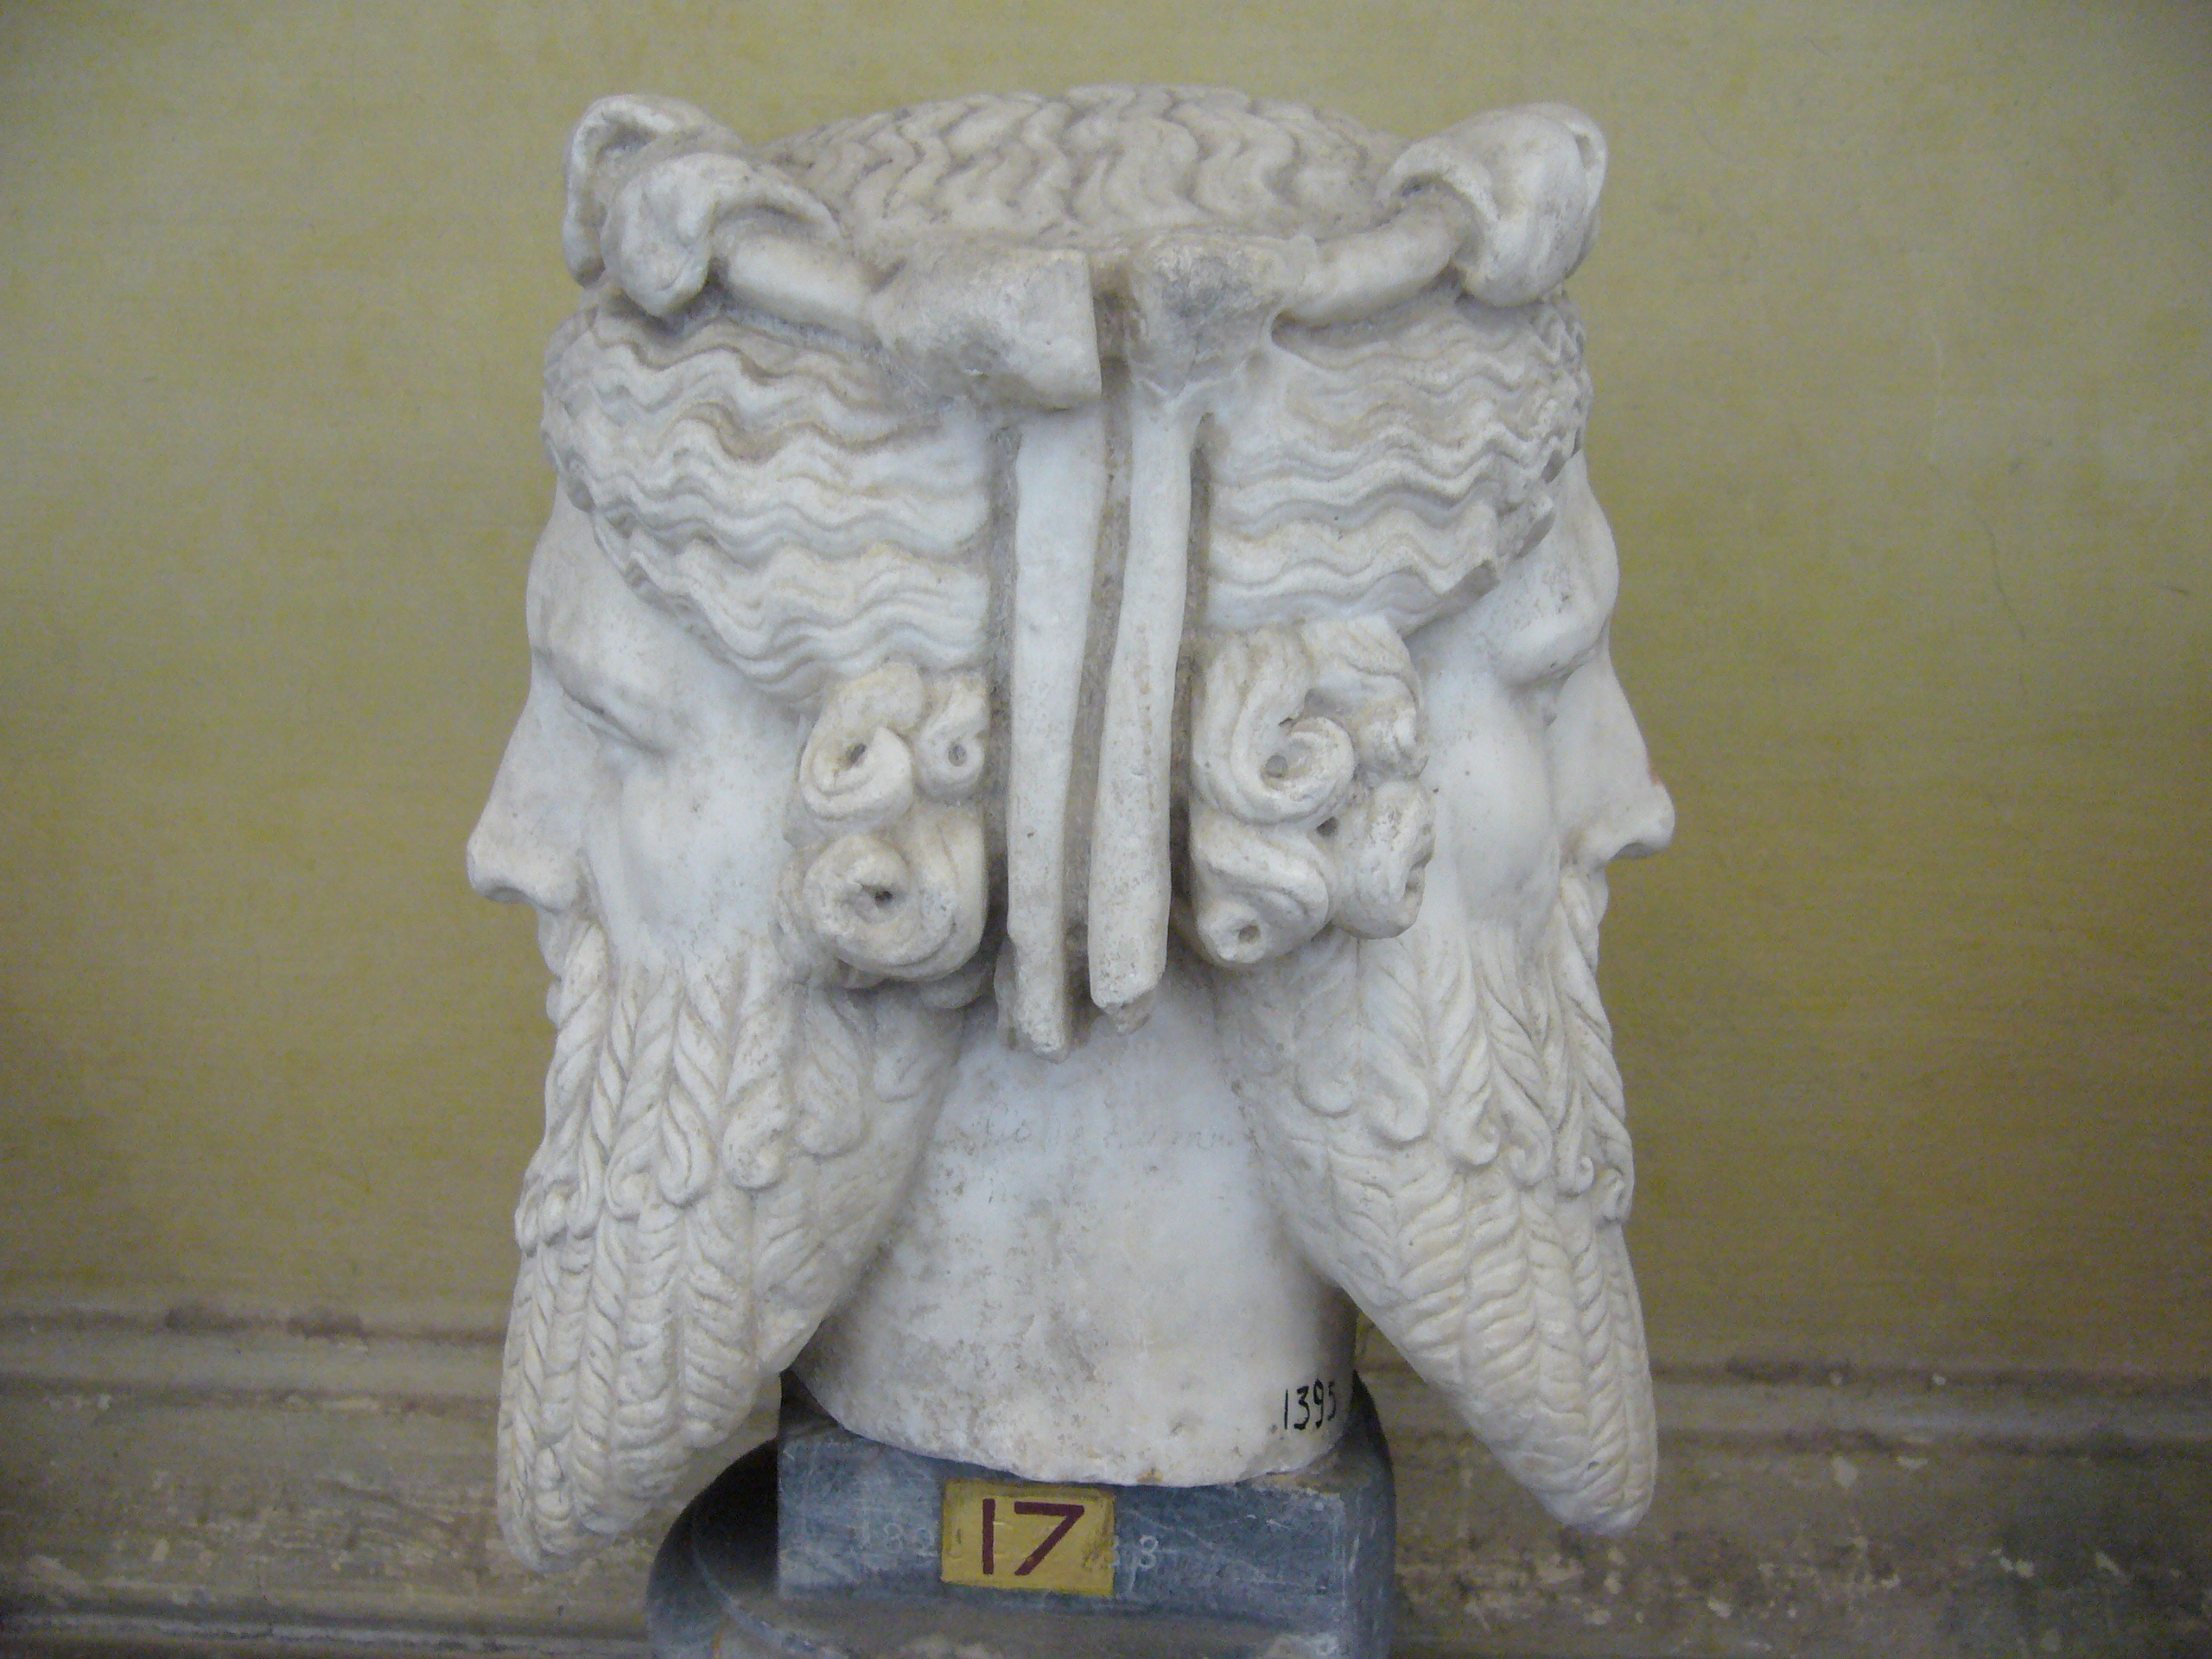 Sculture of the two-faced head of Janus